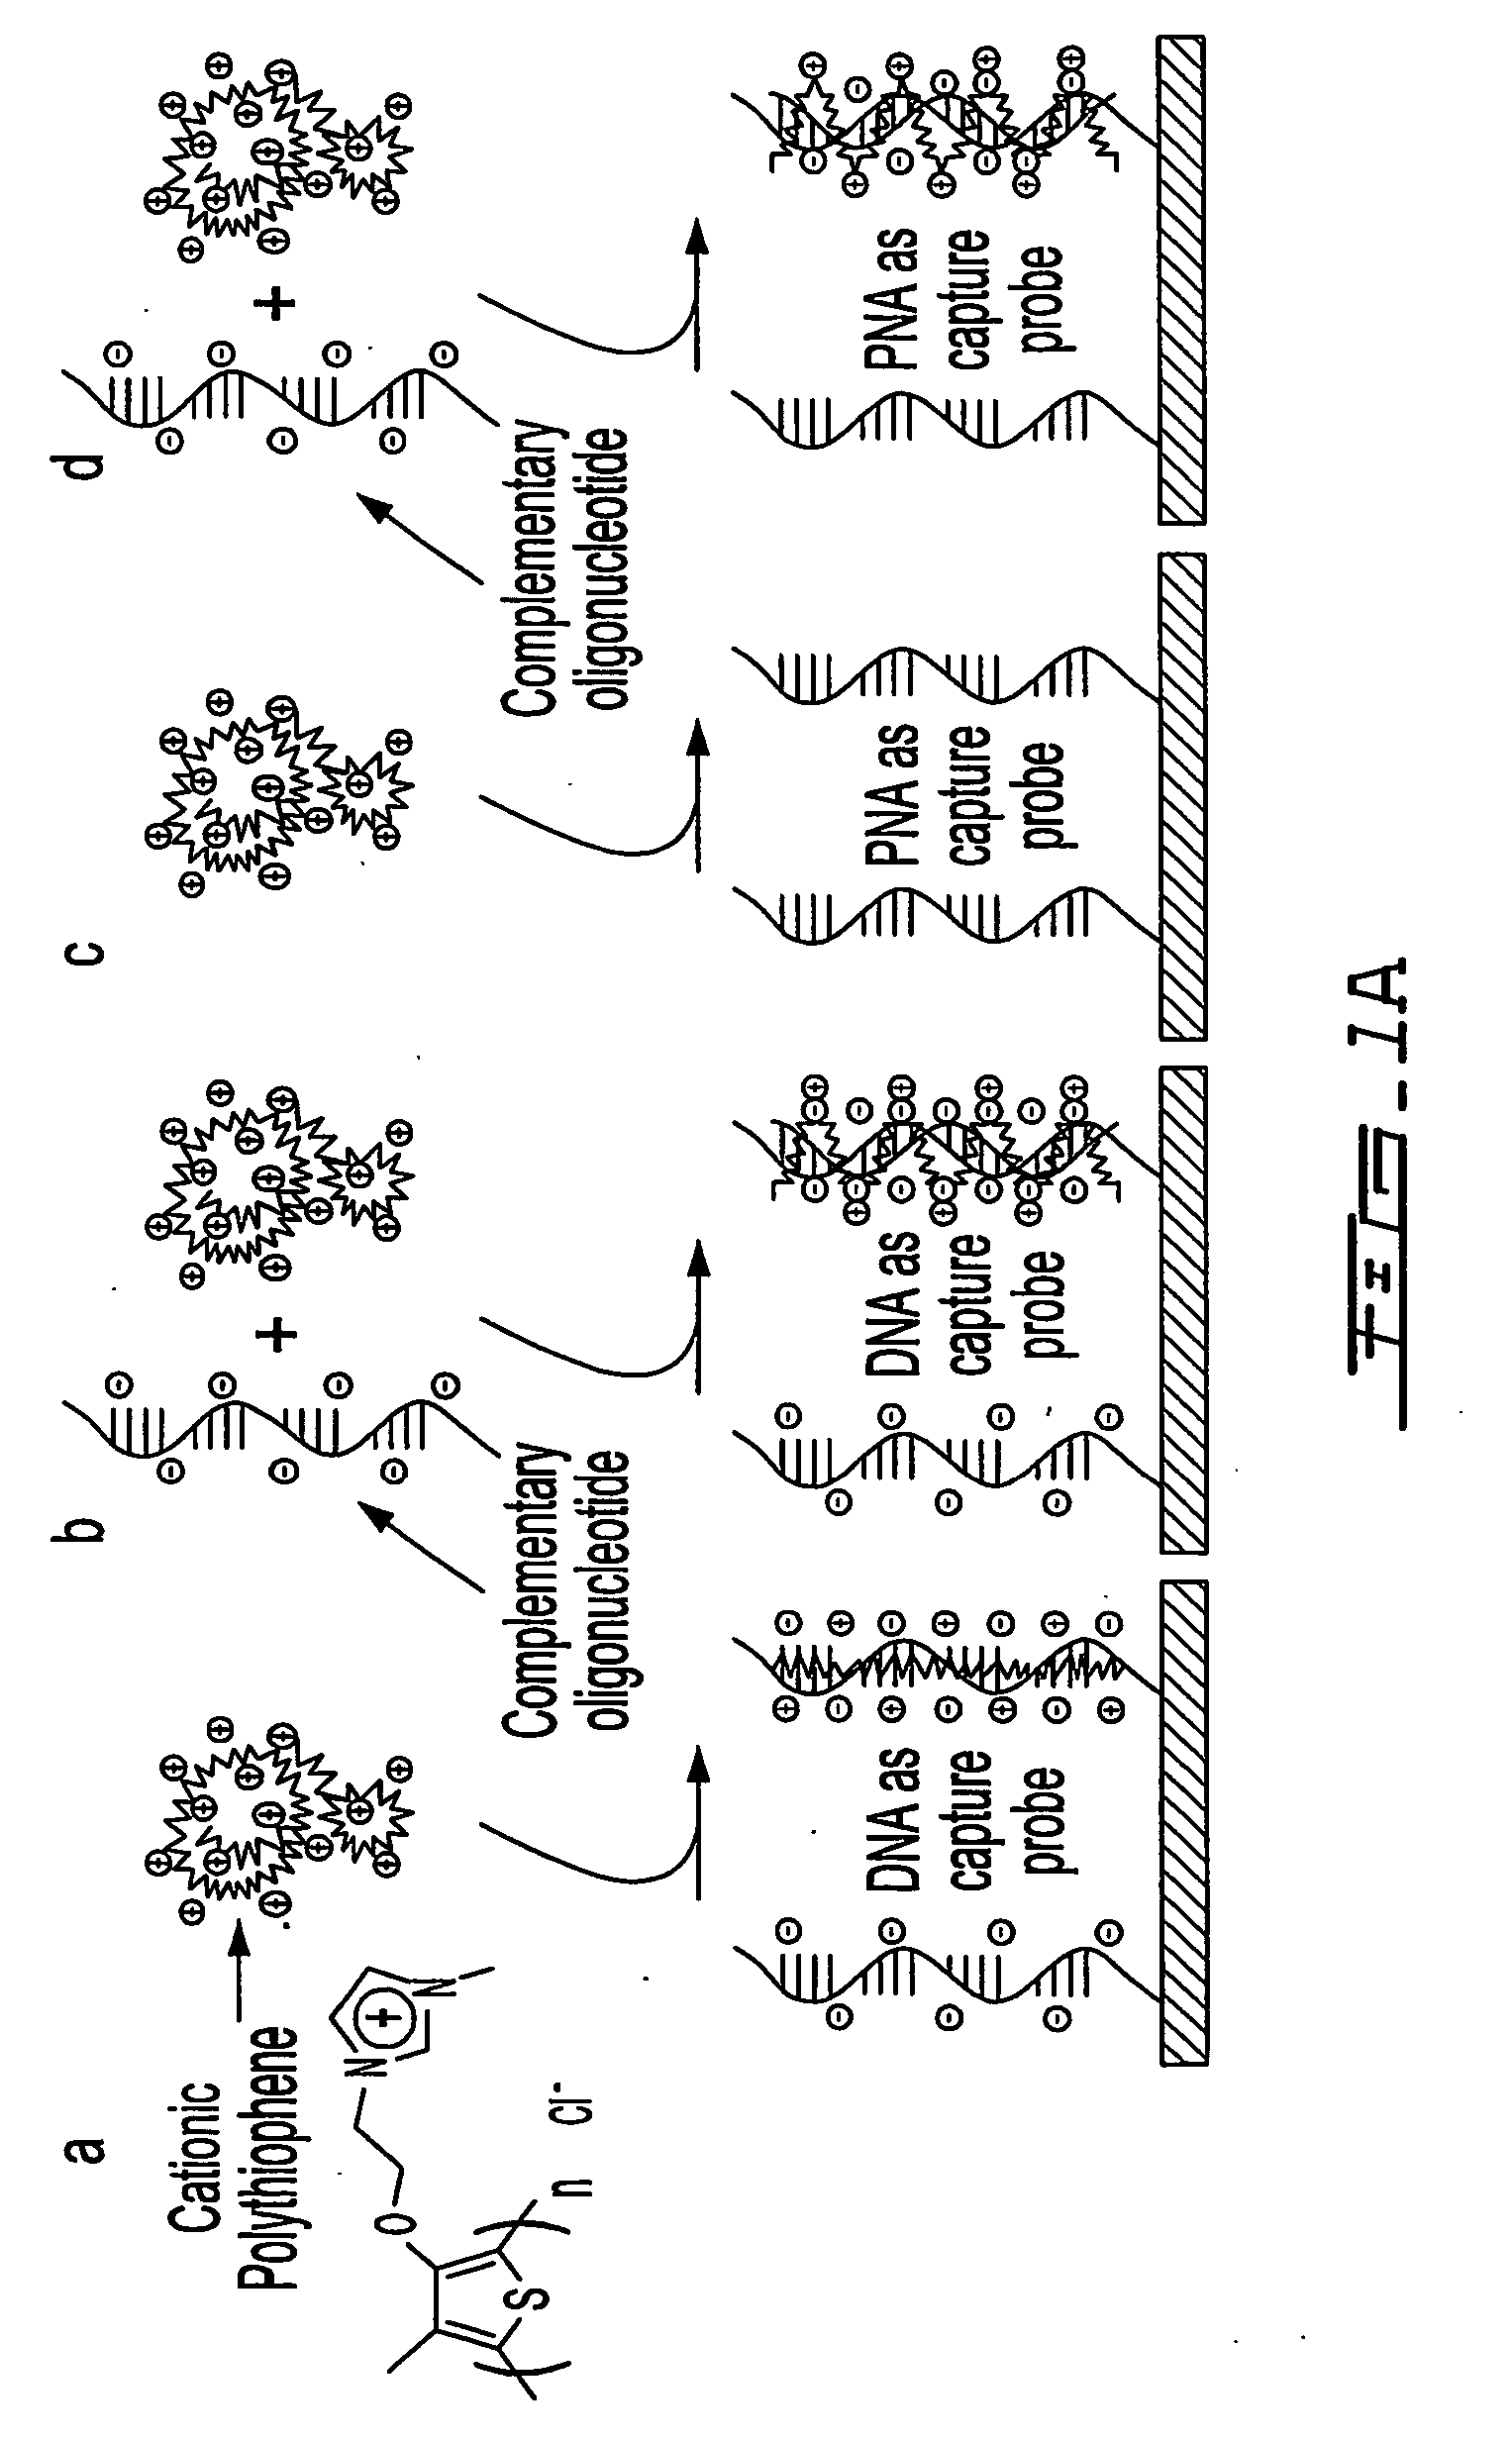 System for charge-based detection of nucleic acids